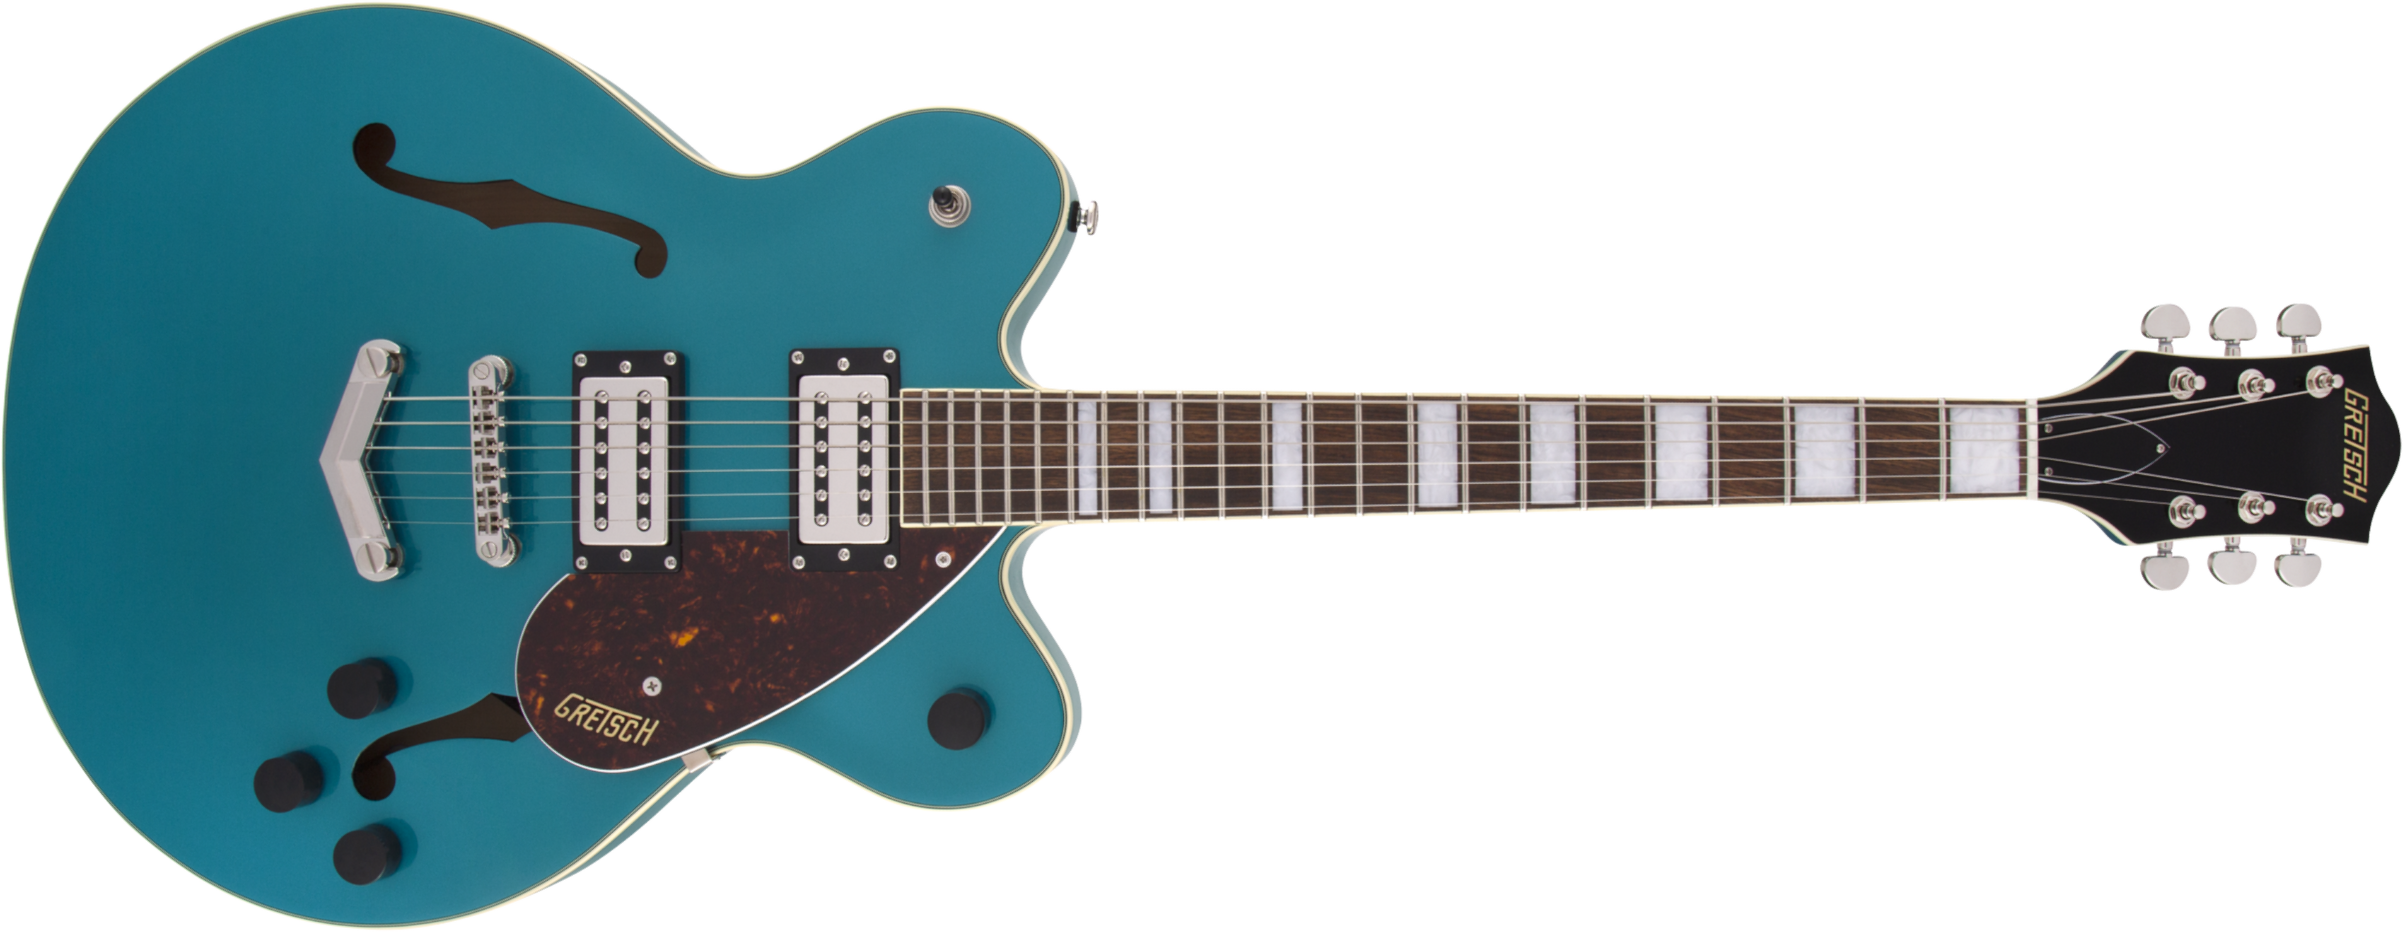 Gretsch G2622t Streamliner Center Block Jr Bigsby Hh Trem Lau - Ocean Turquoise - Semi-hollow electric guitar - Main picture